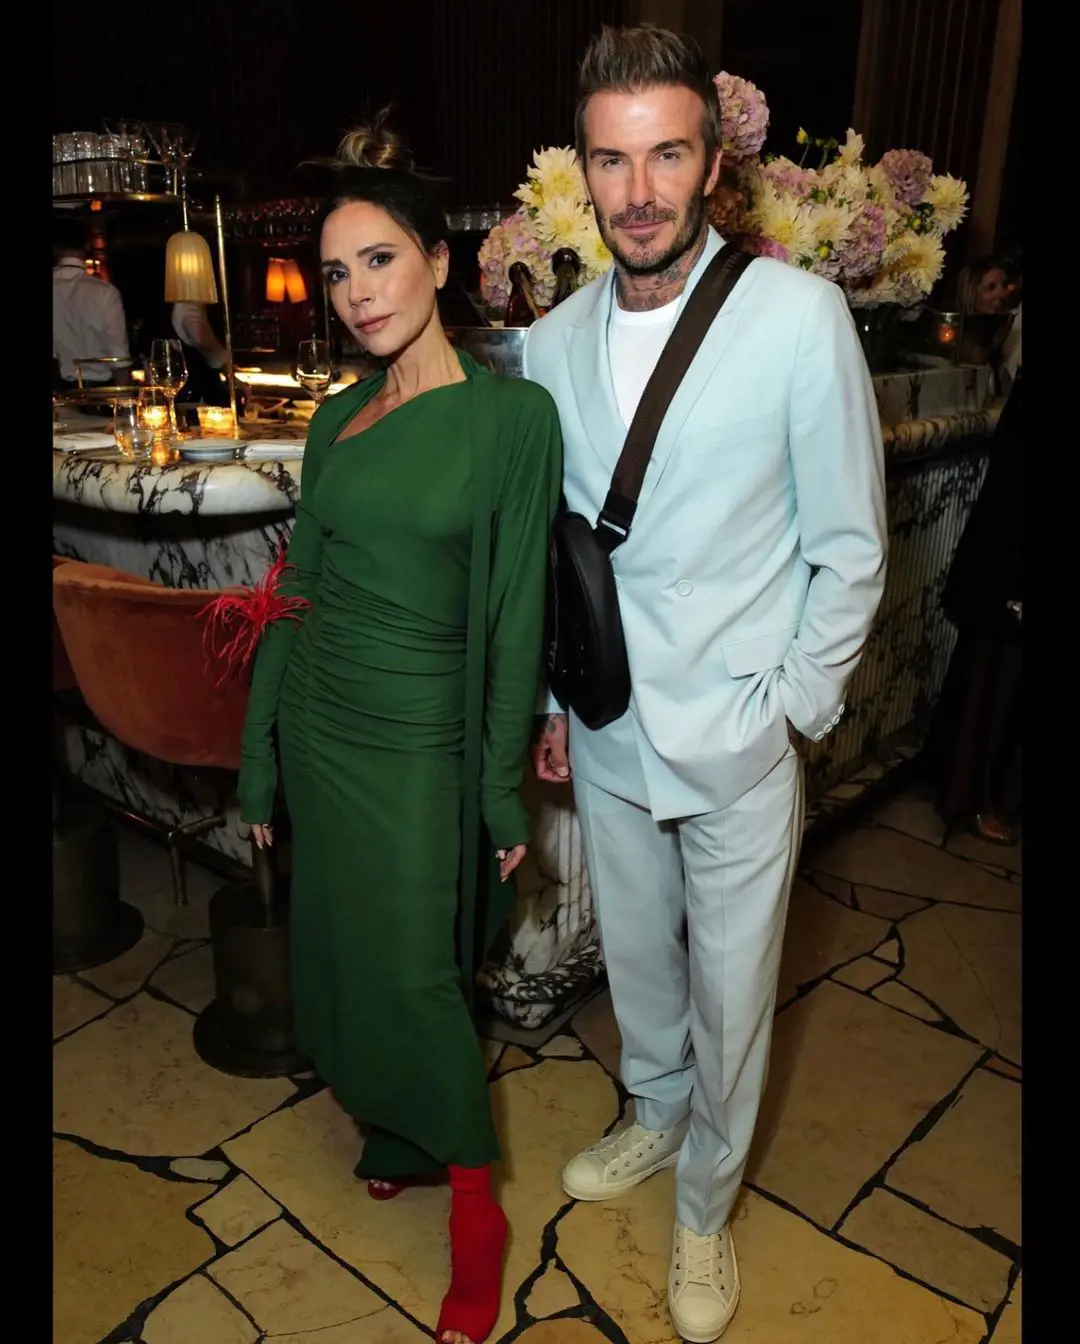 Former English football star David Beckham and his wife Victoria Beckham at a Paris function in October 2022